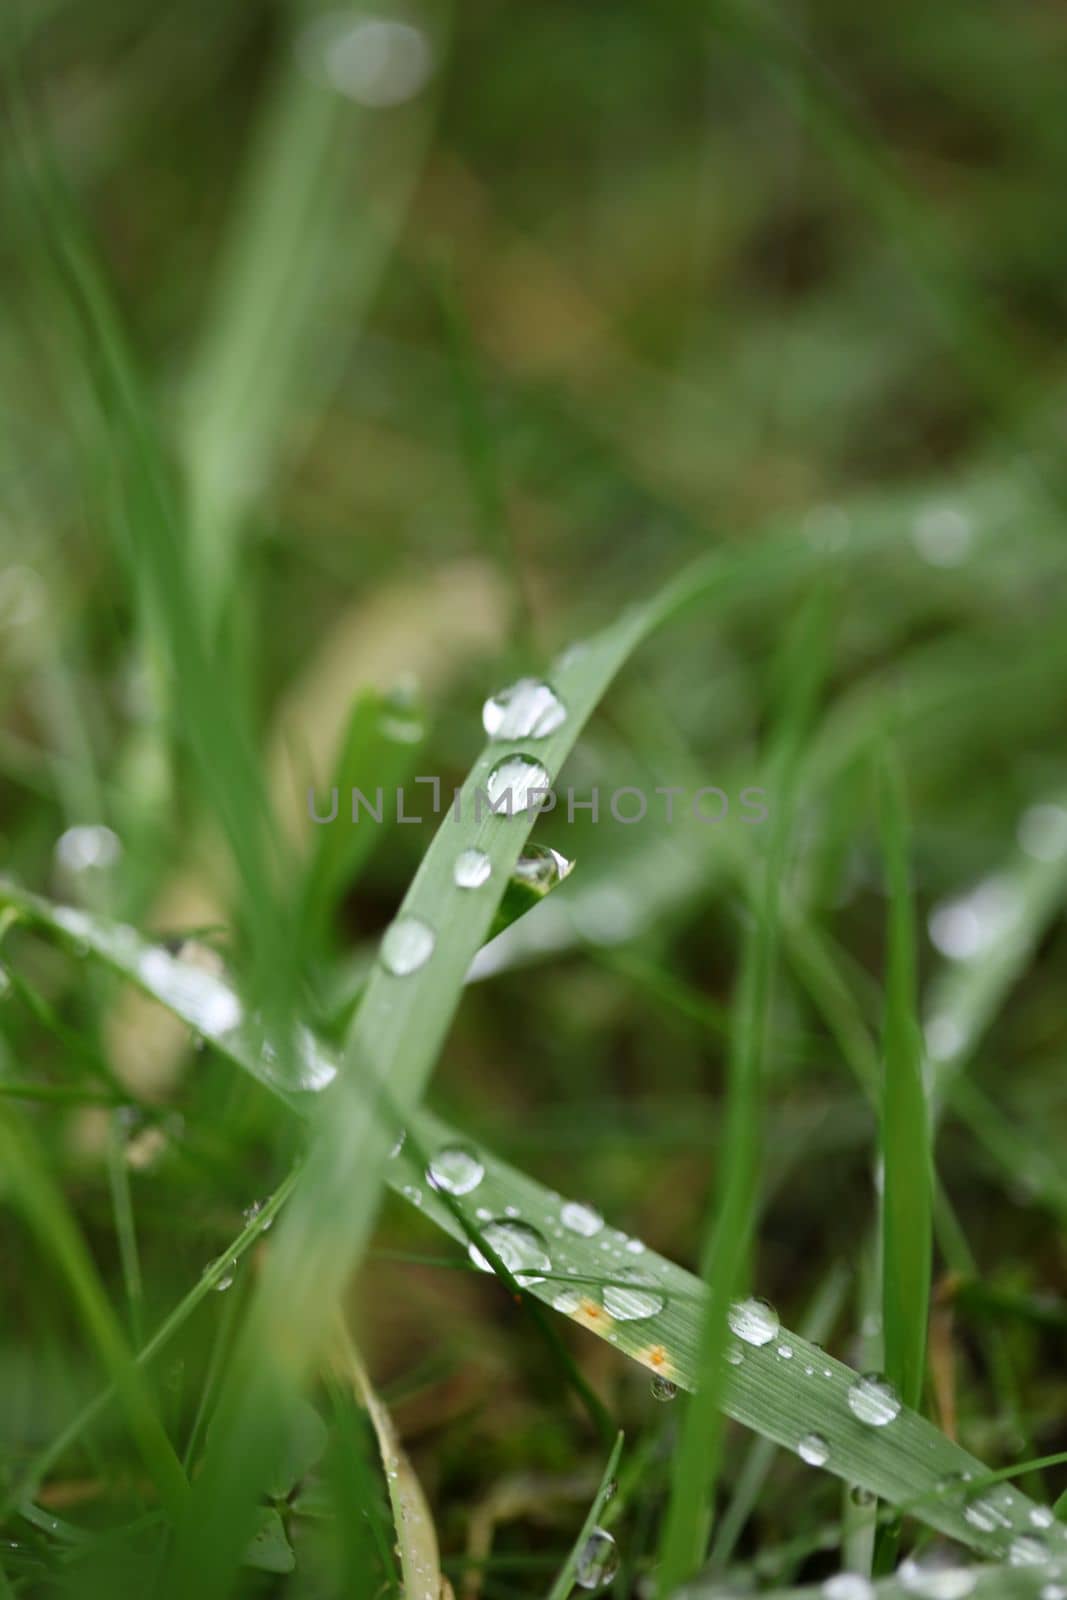 Winter rain droplets in grass leaves background close up nature exploration big size high quality prints